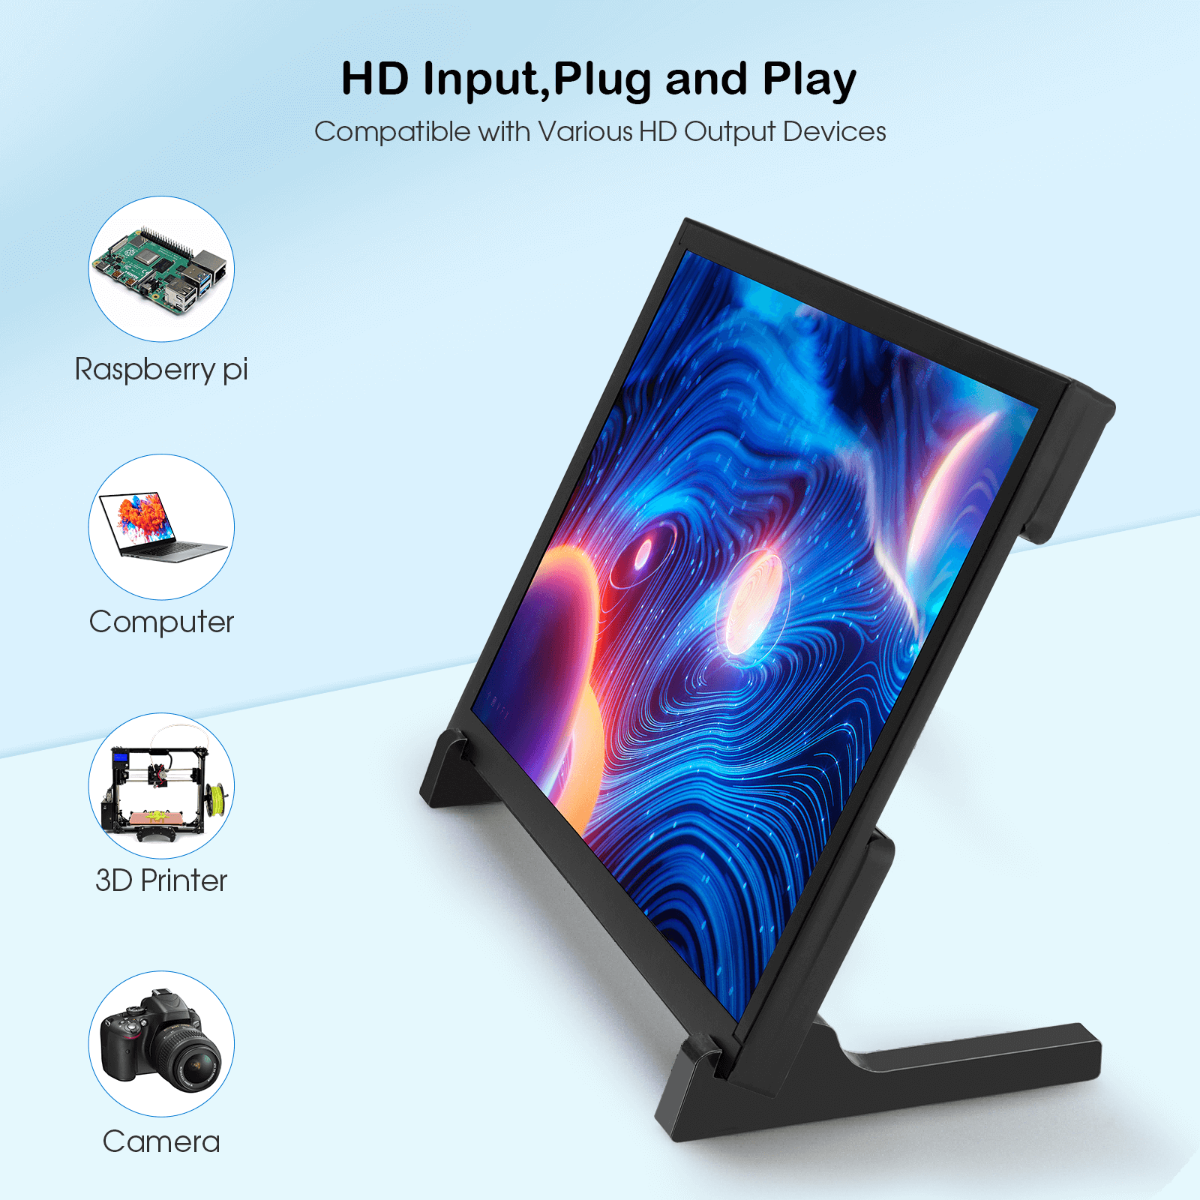 HDMI Input, 10 inch monitor support plug and play